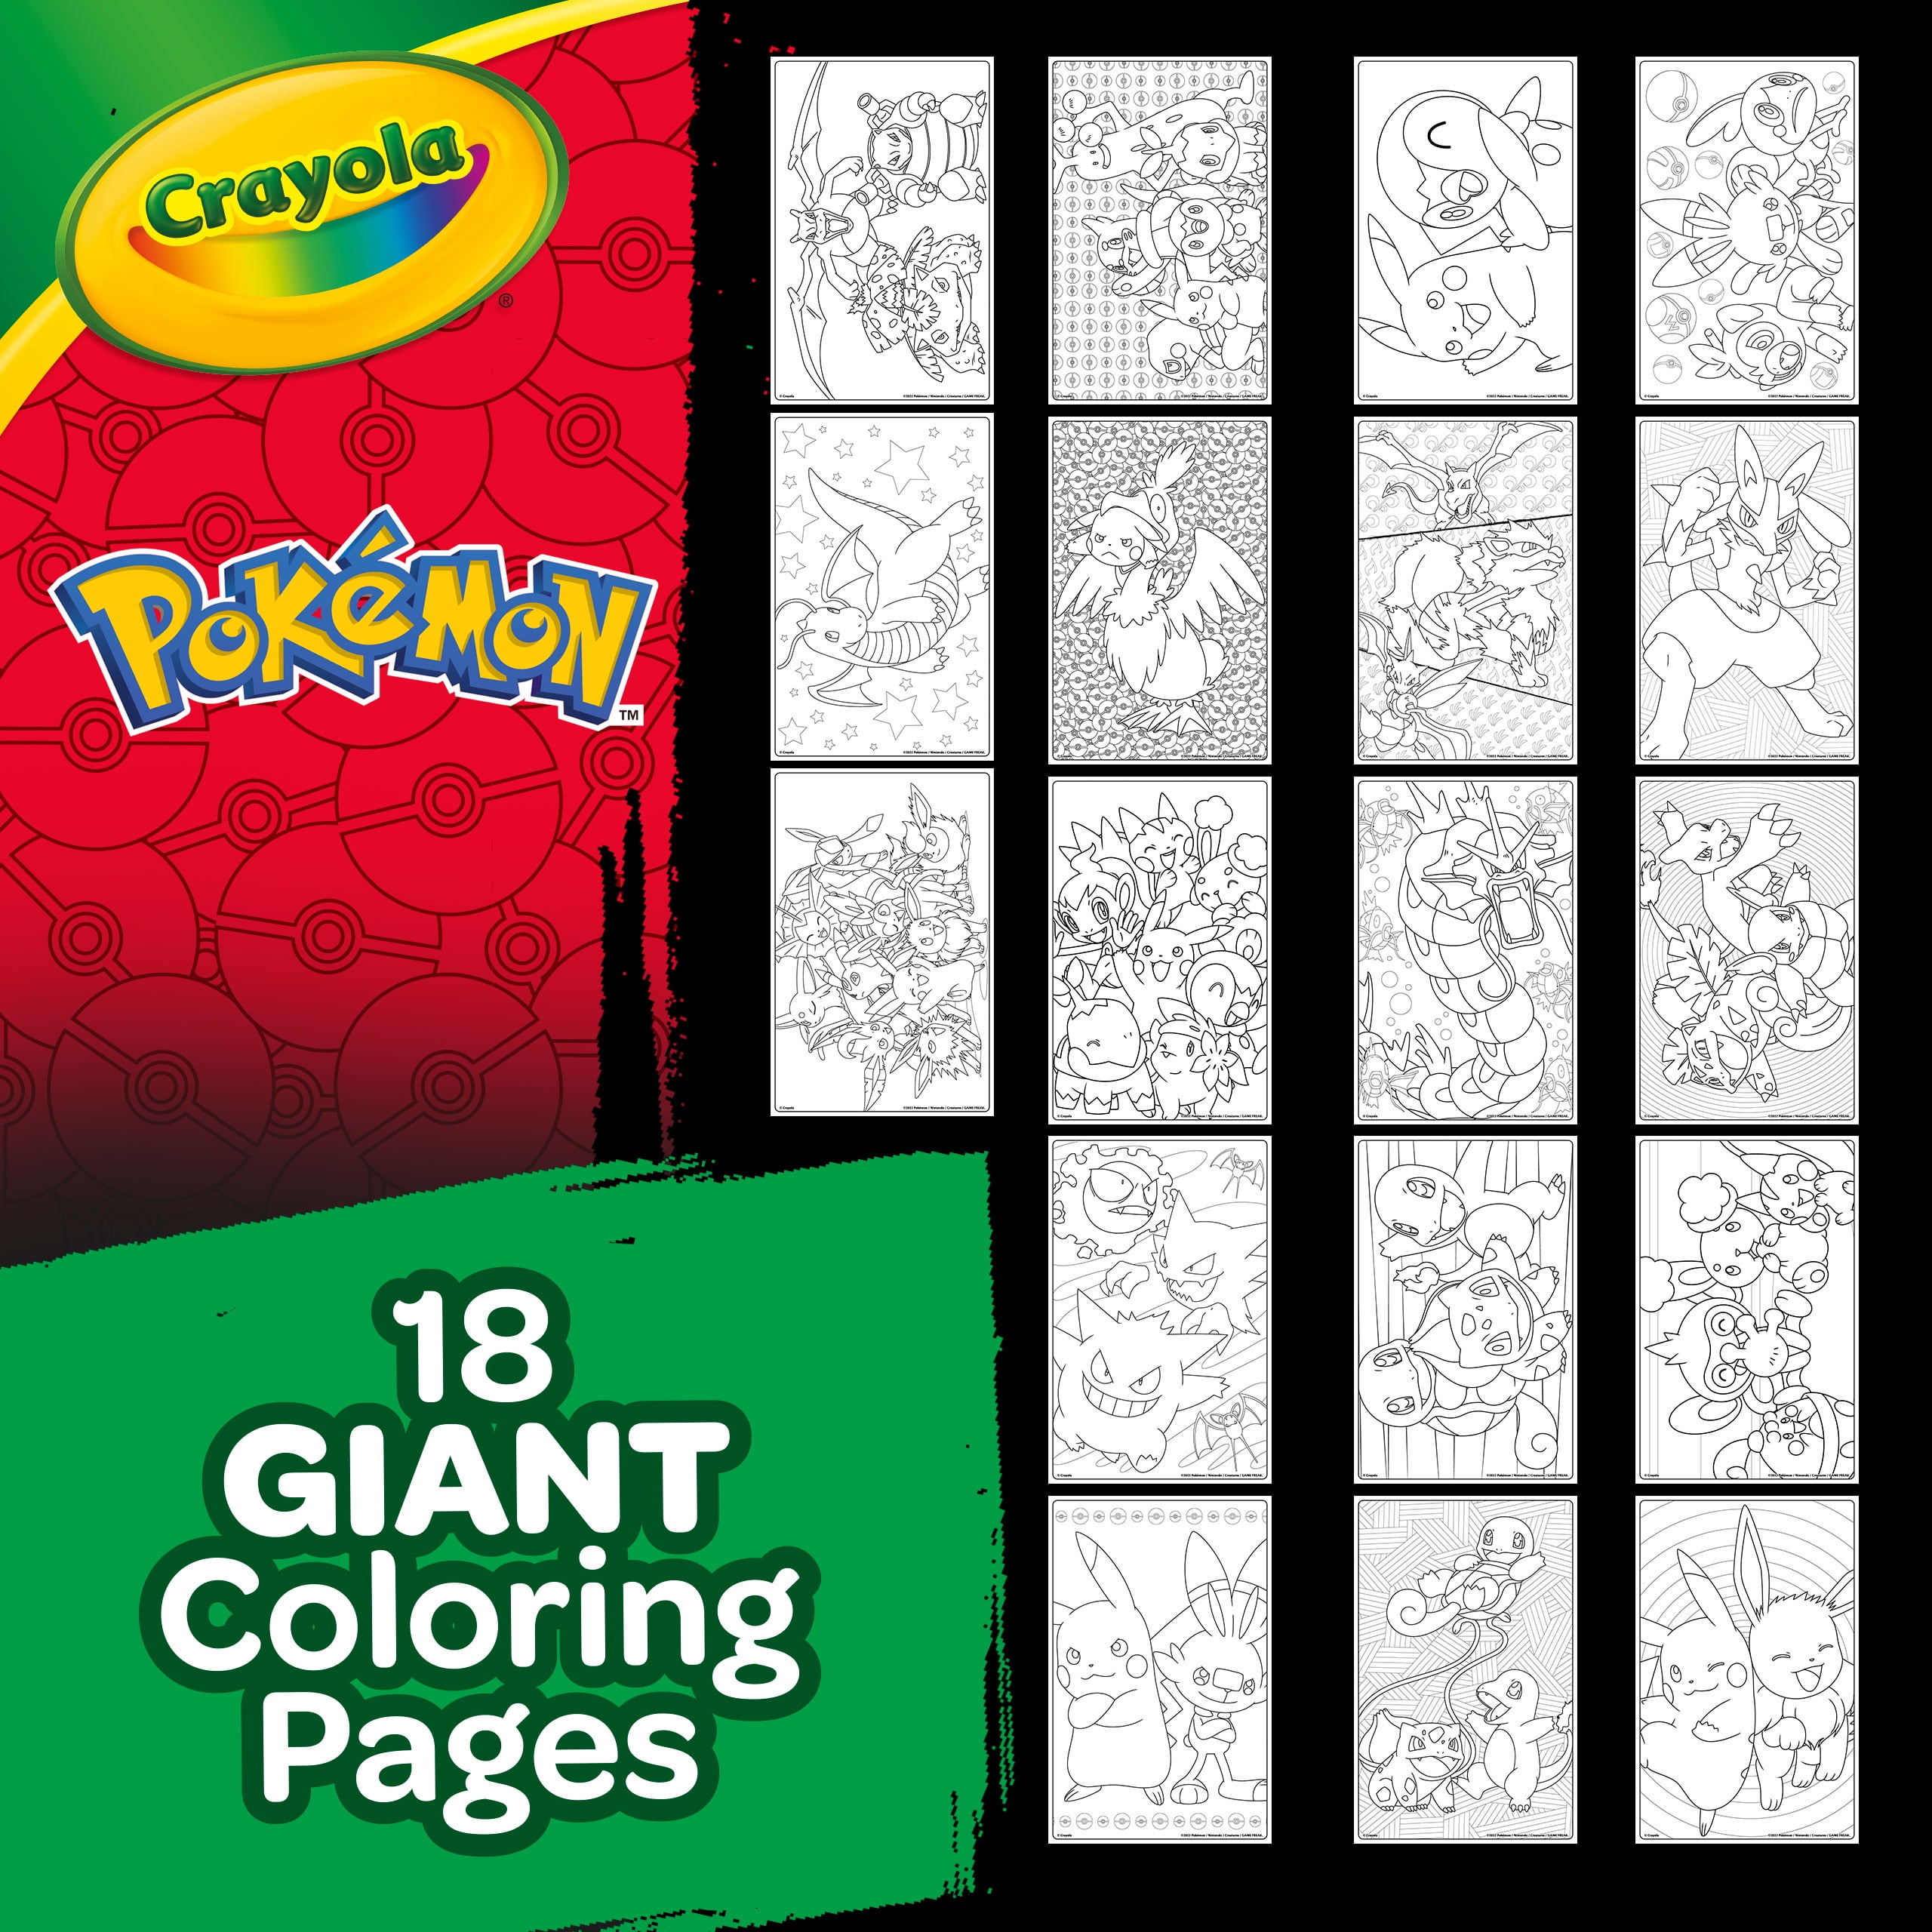 Crayola Pokemon Giant Coloring Pages 1 ct